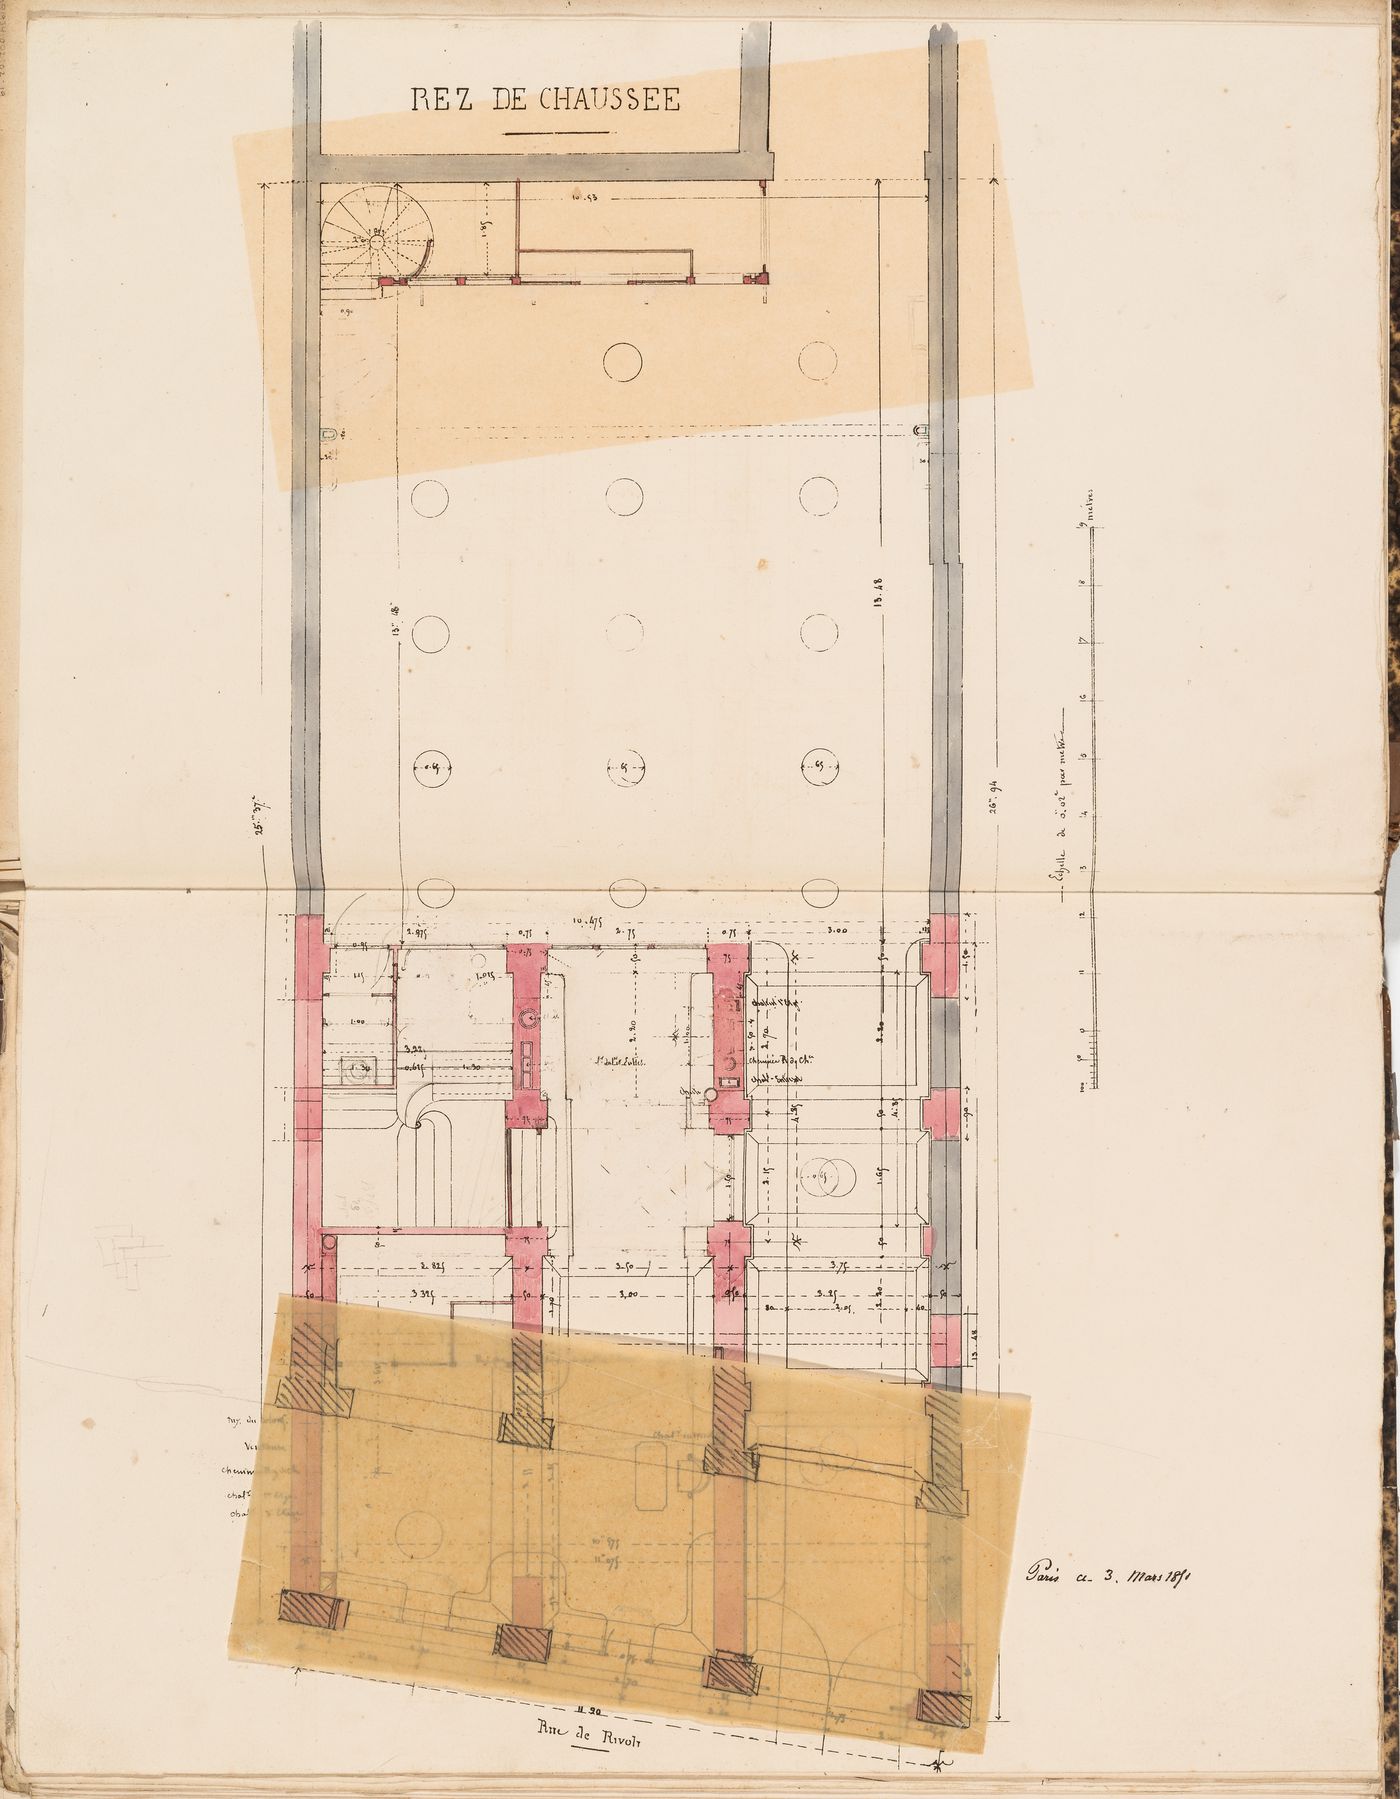 Ground floor plan with an attached revision, for the Administration générale des omnibus Office Building, Paris